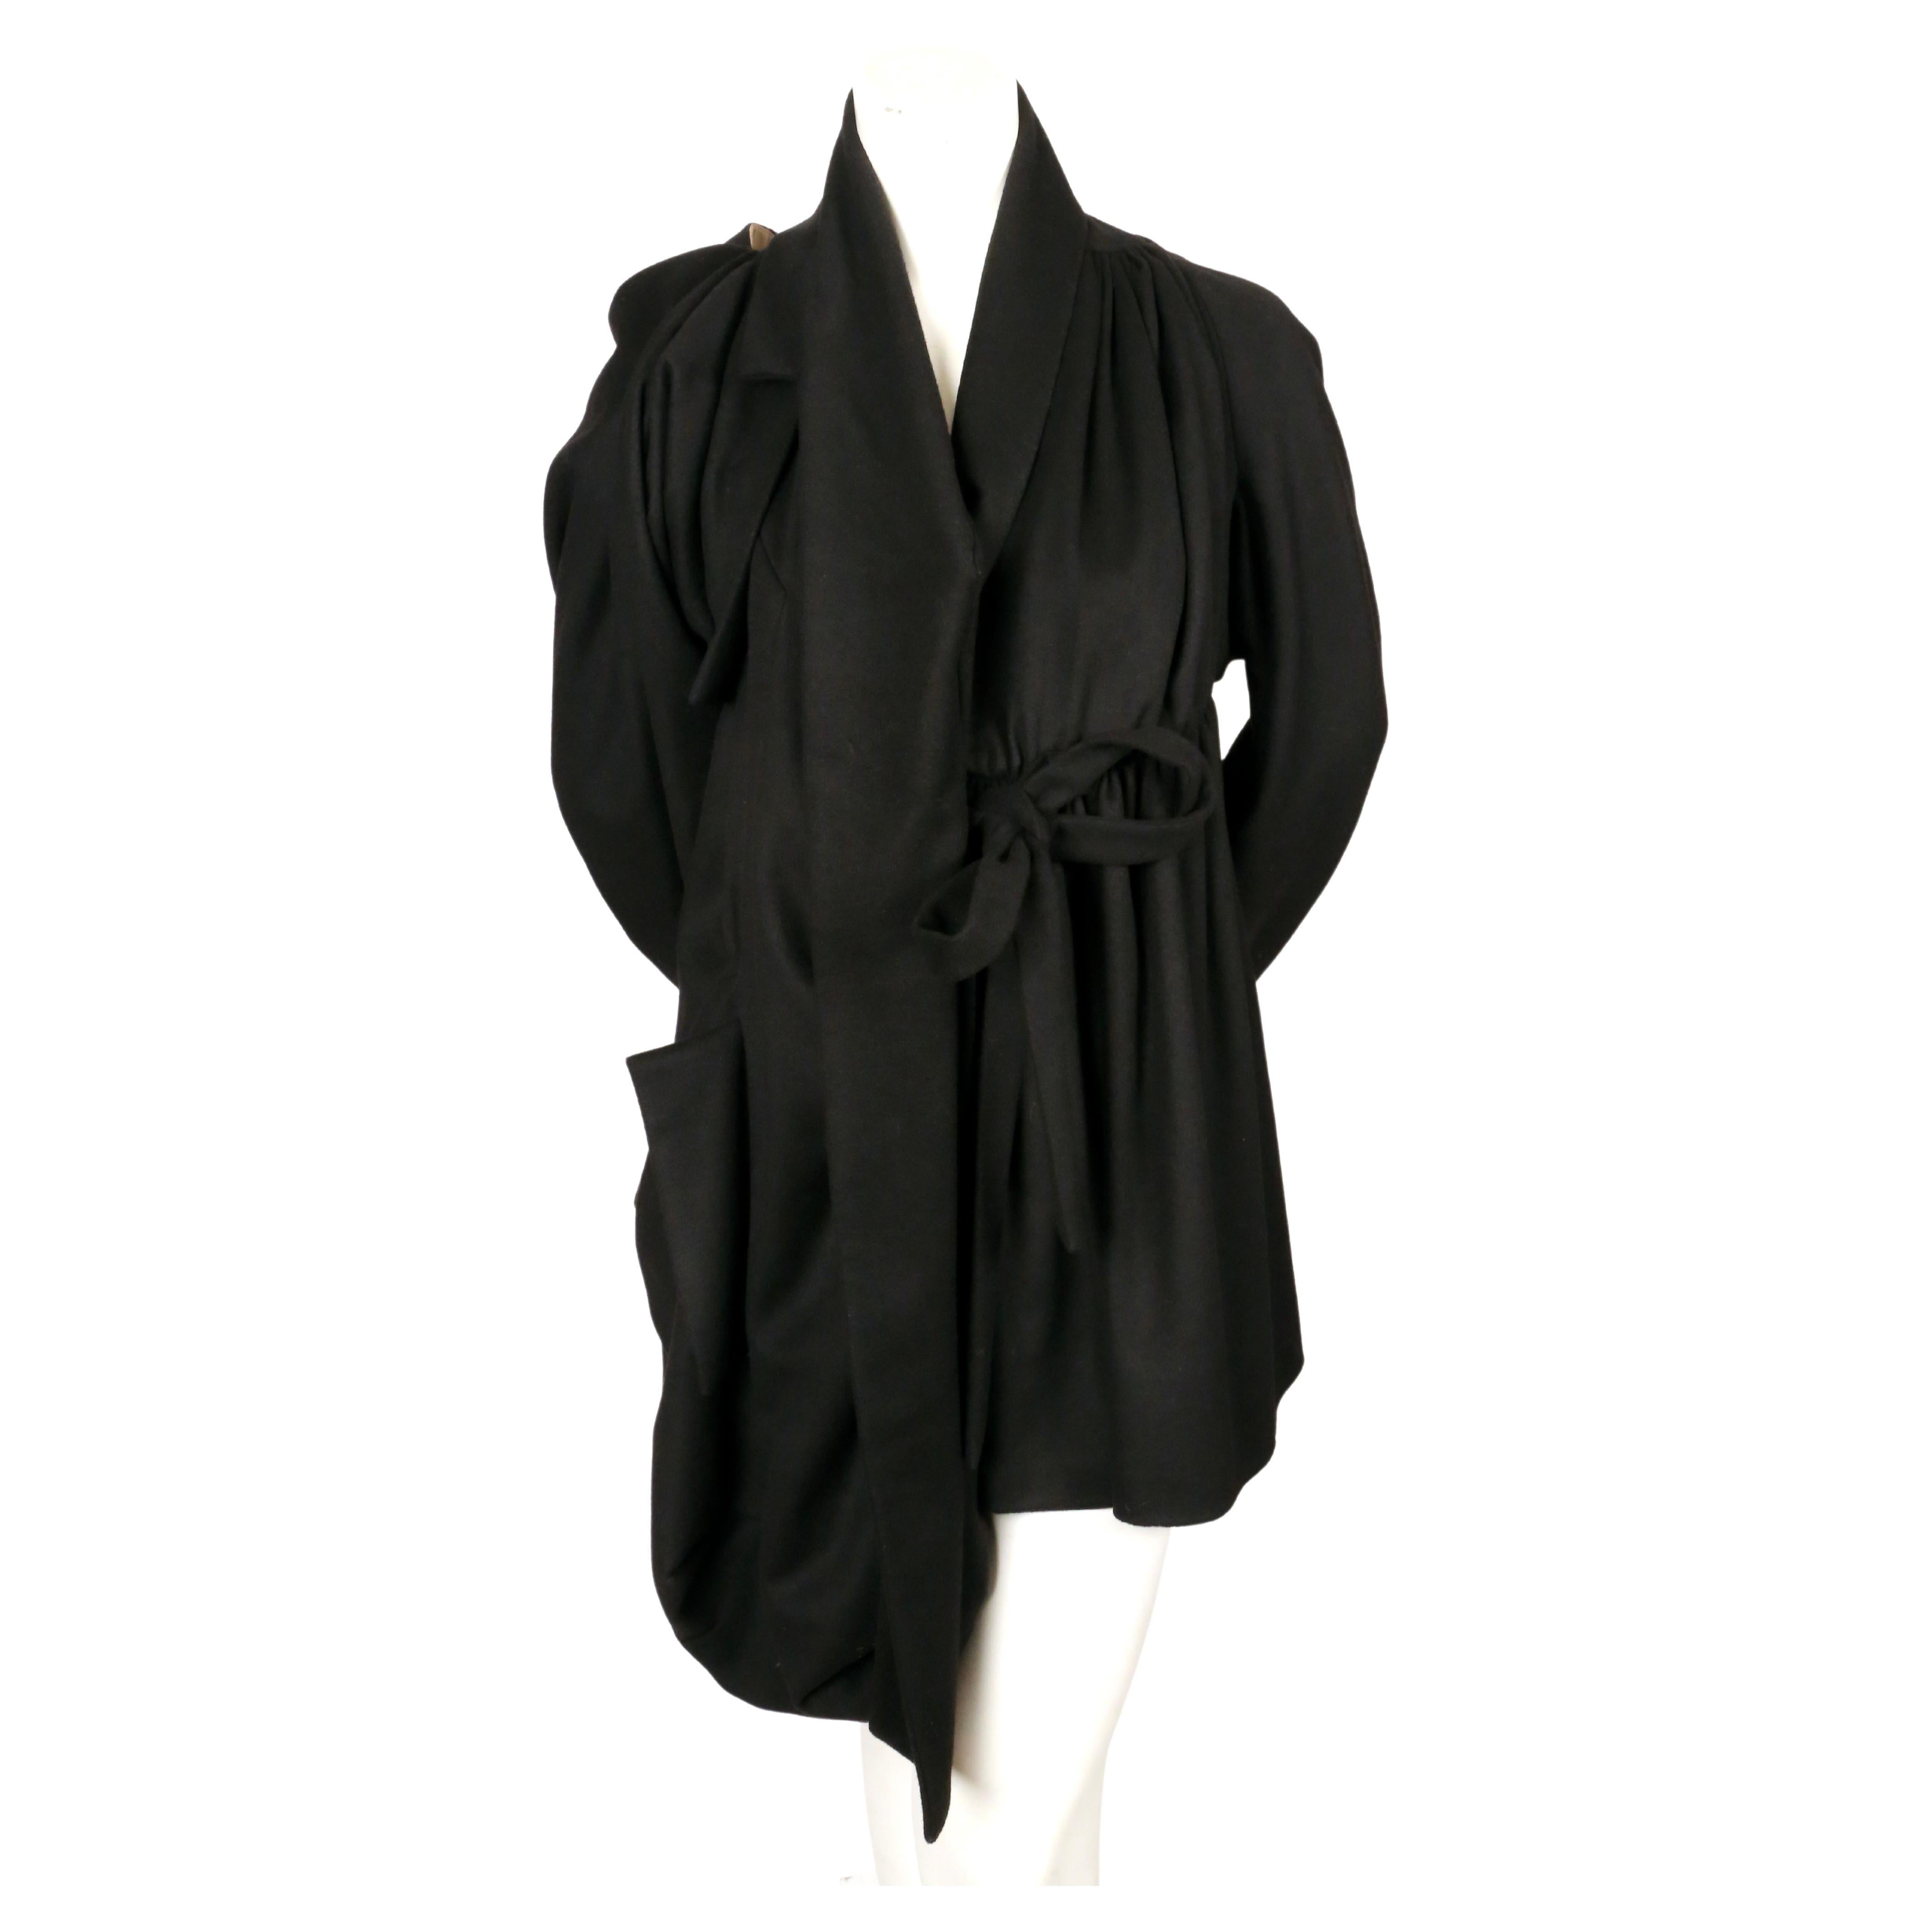 Dramatic, draped, black wool coat with asymmetrical front from Vivienne Westwood. UK size 14 which can fit a US 4-8. Approximate measurements:  bust 40